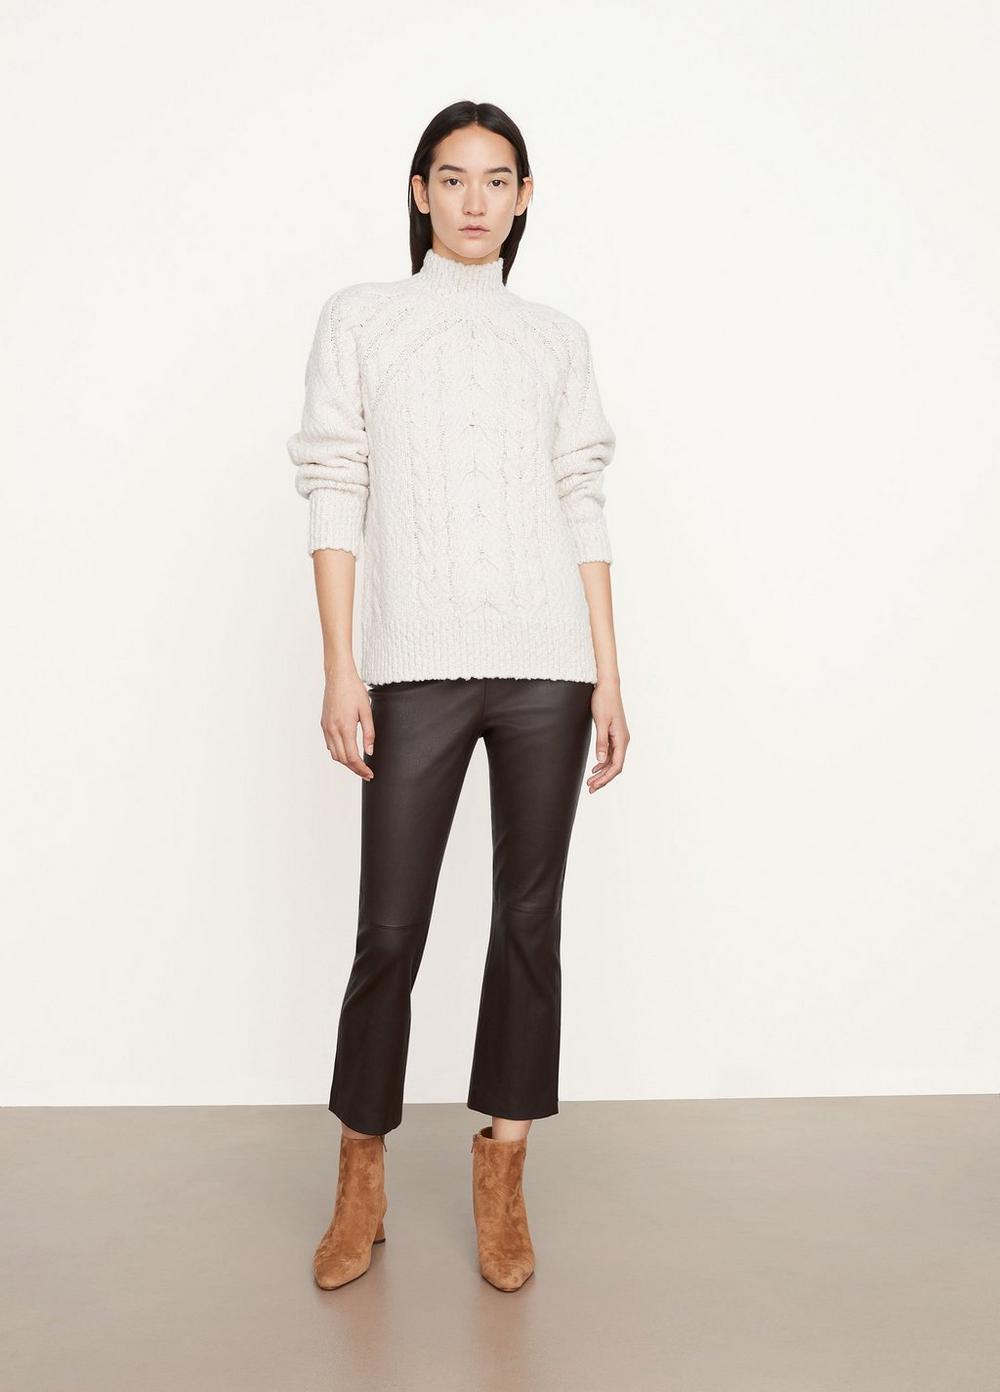 Rising Cable Turtleneck Sweater